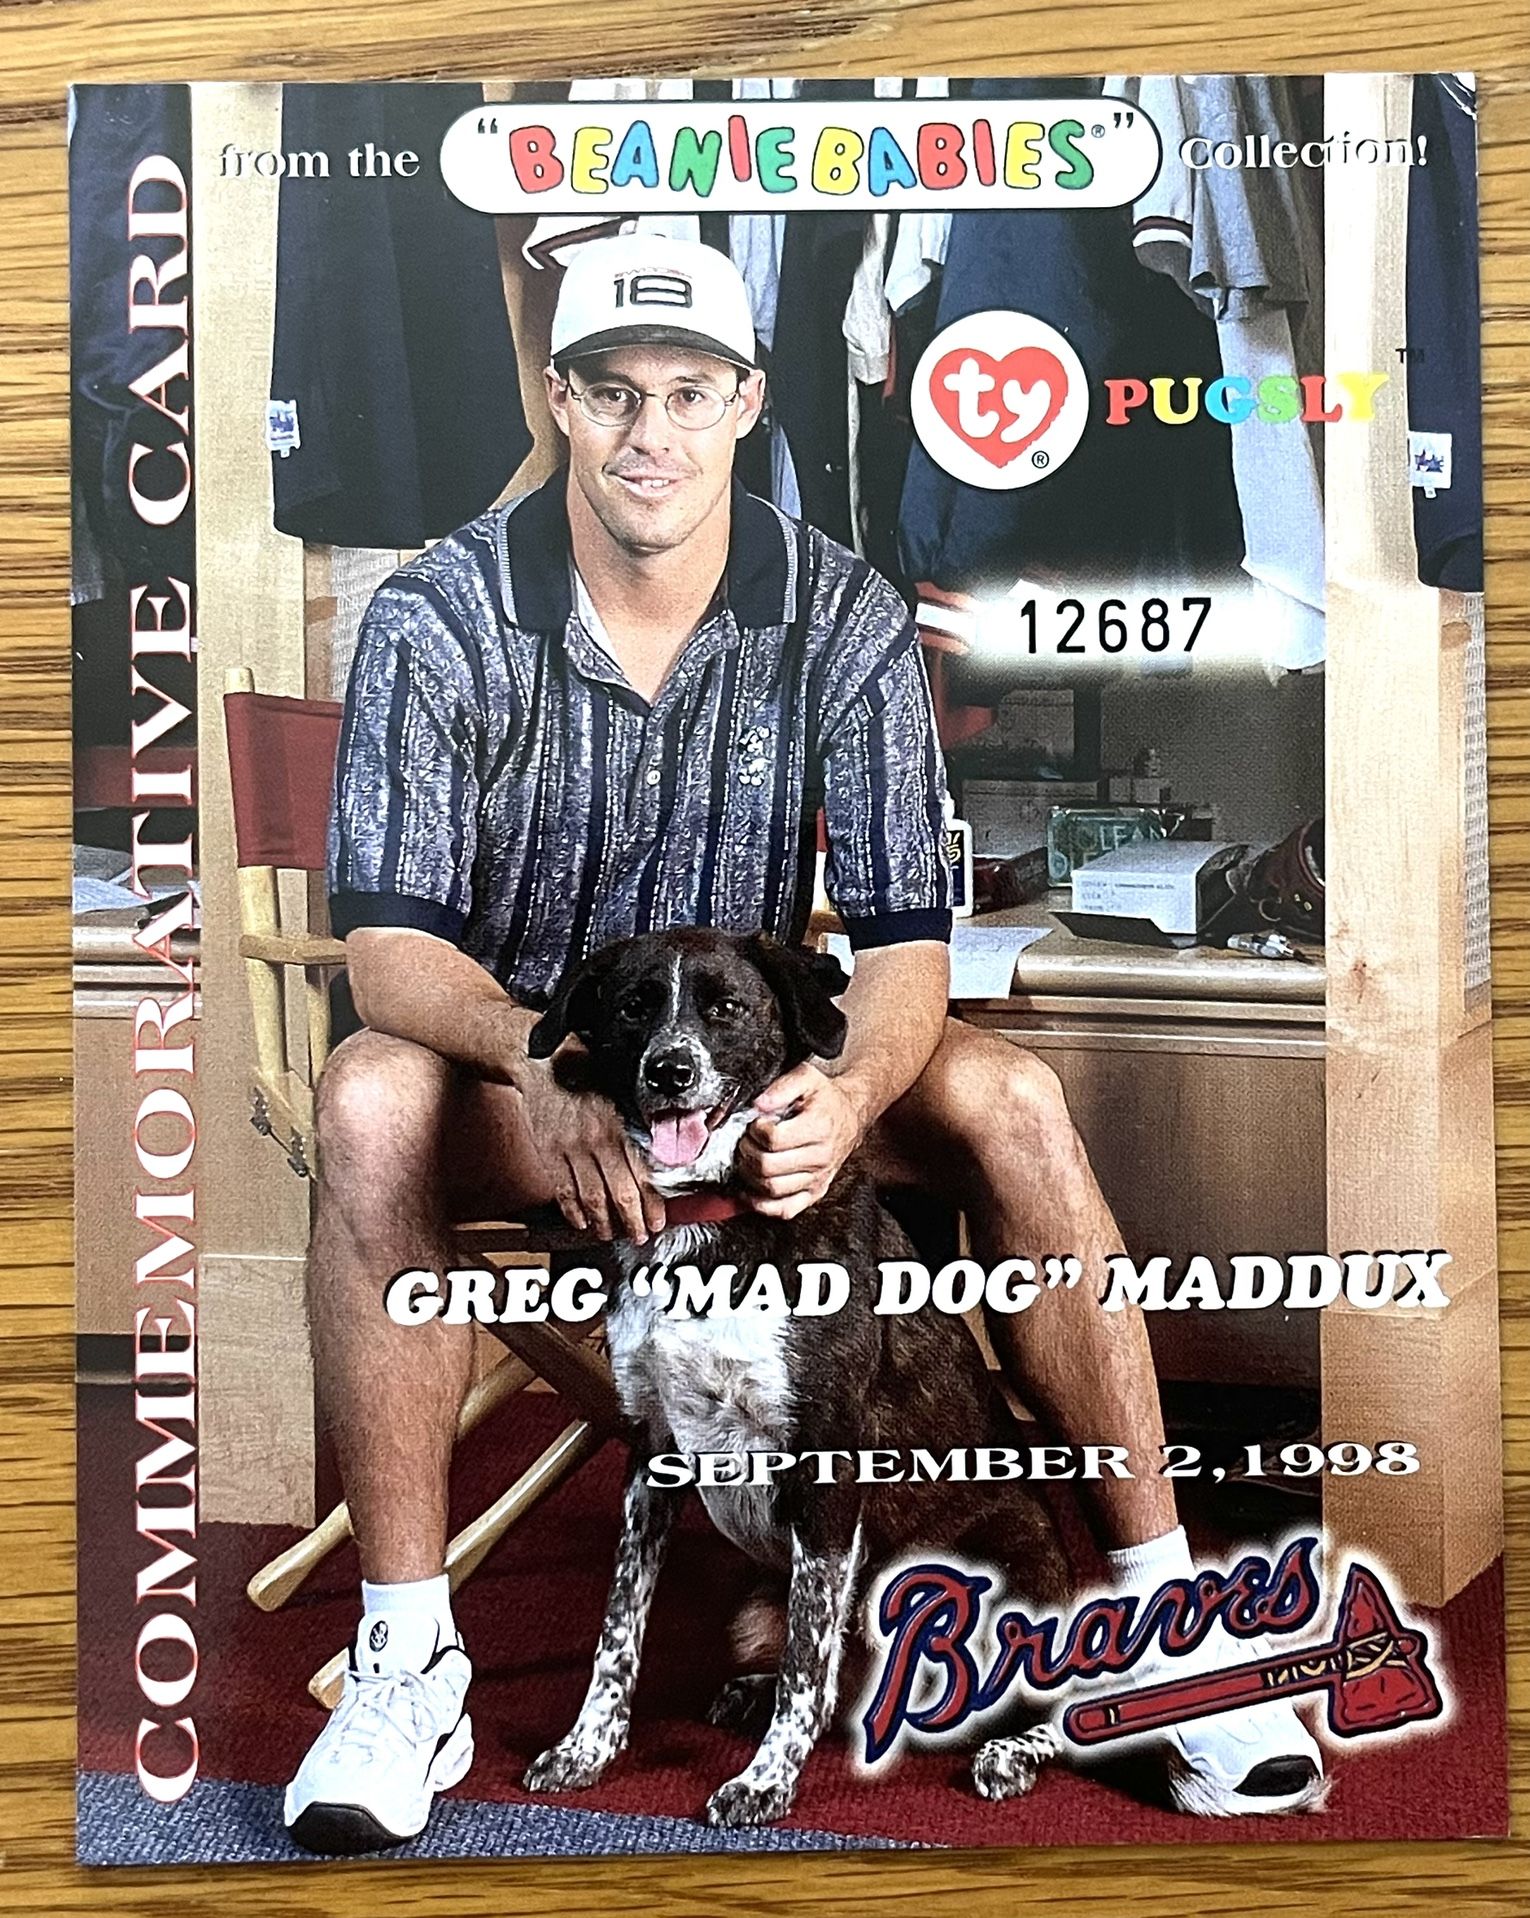 1998 2-5x7 Commemorative Cards By Beanie Babies With Pugsly Gregg Maddux #12687